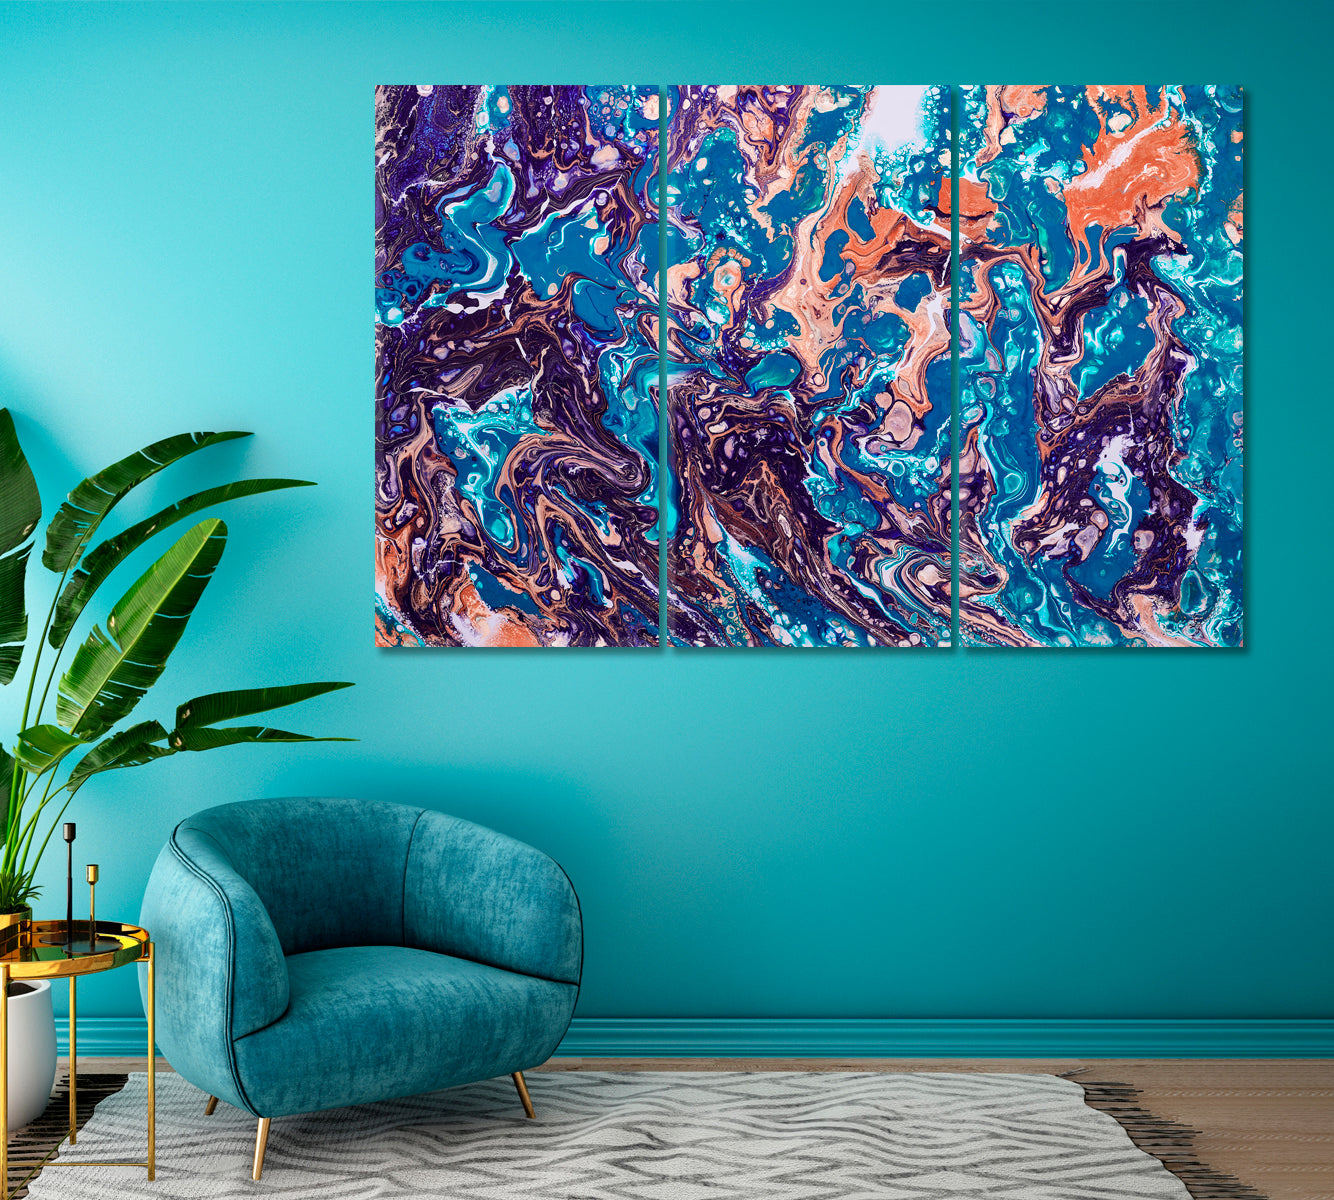 Blue Marble Fluid Painting Canvas Print ArtLexy 3 Panels 36"x24" inches 